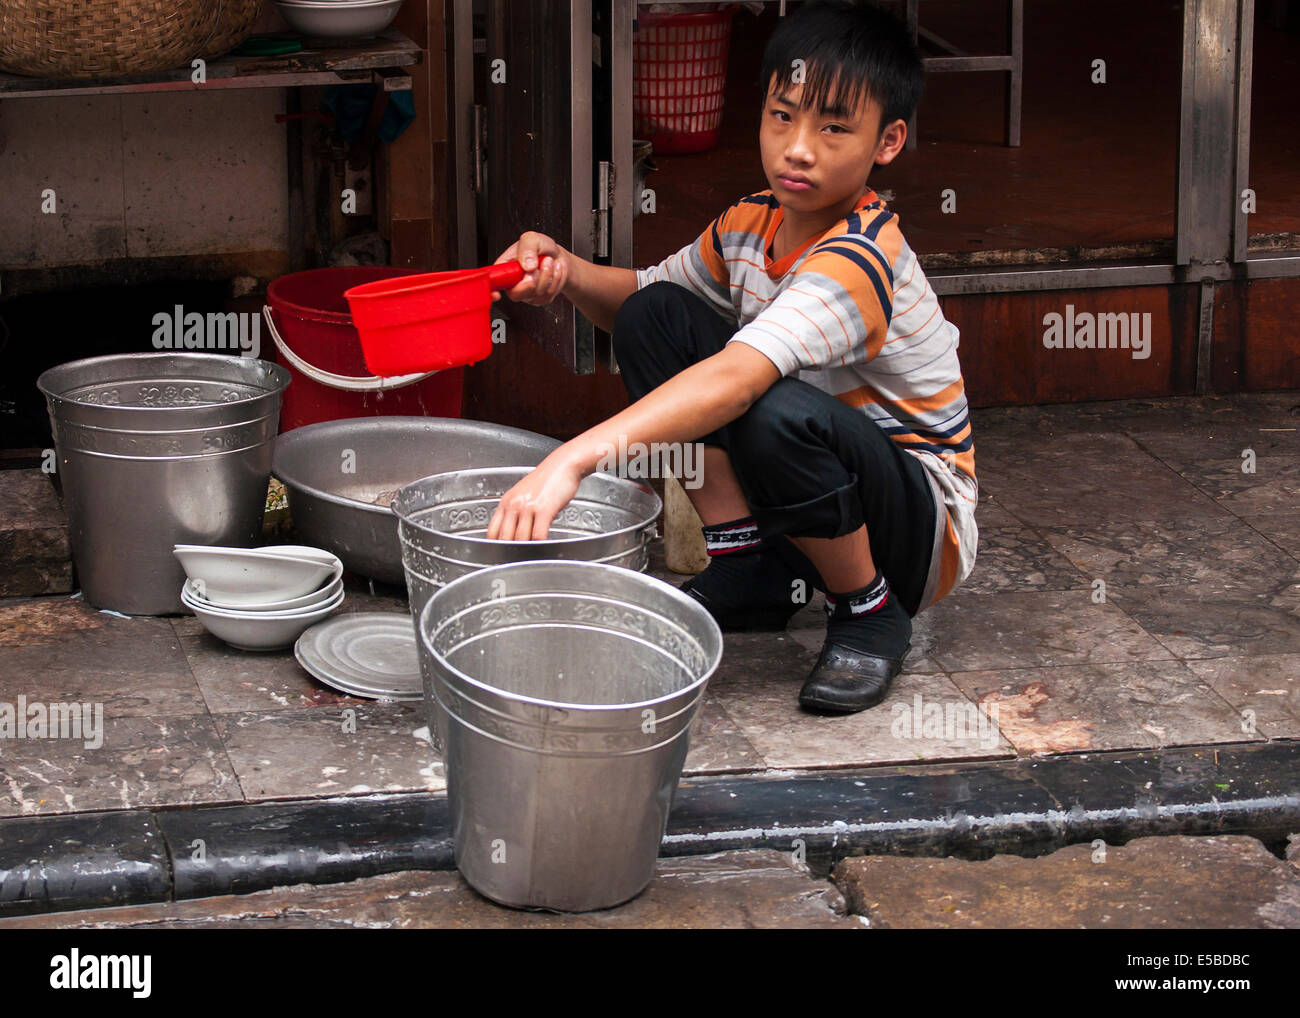 Child Labor - Sad looking young boy rinsing plates in metal buckets. Stock Photo